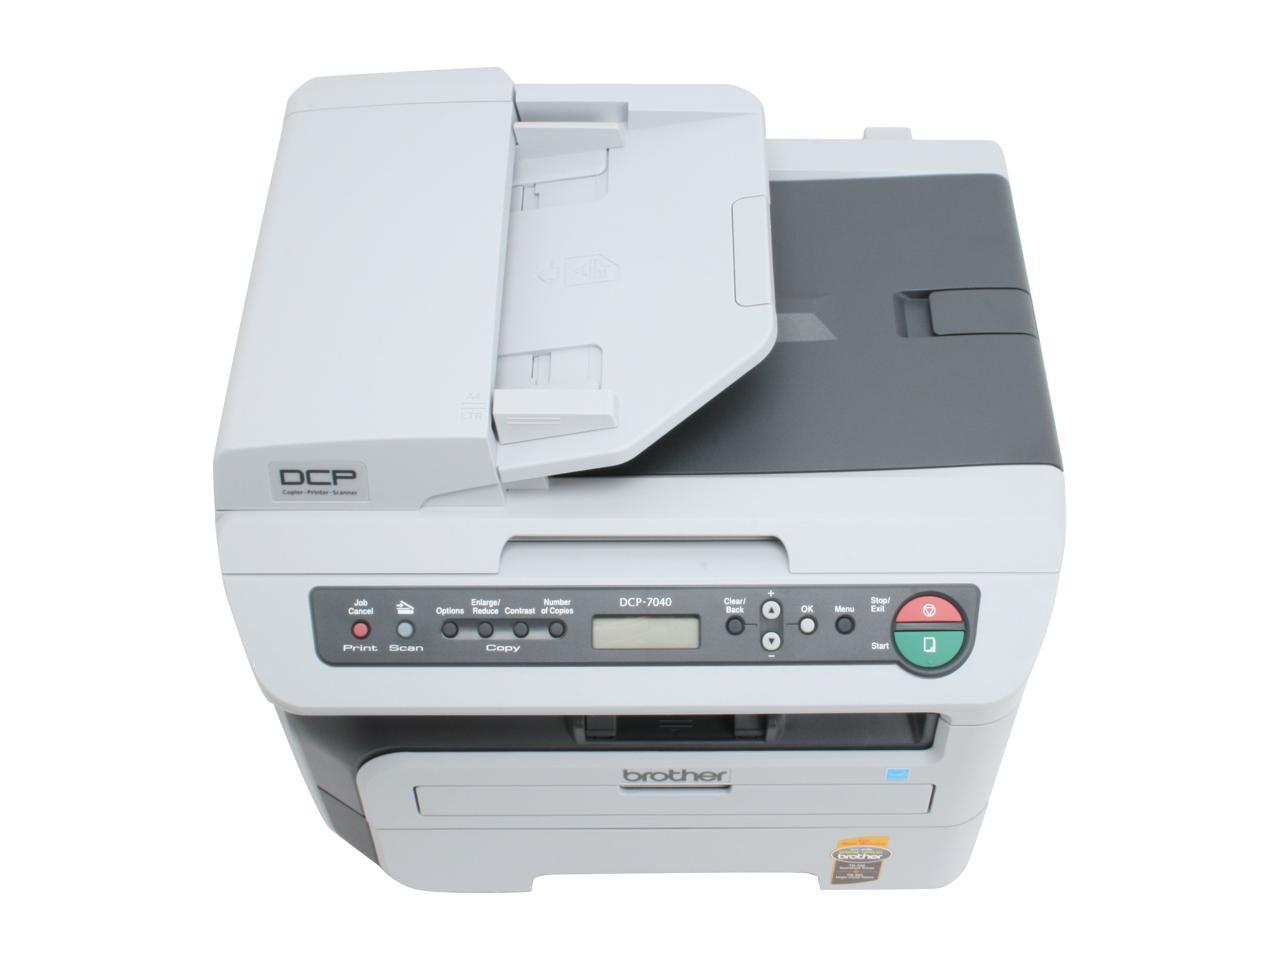 Brother dcp 7040 software download how to download sd card to pc